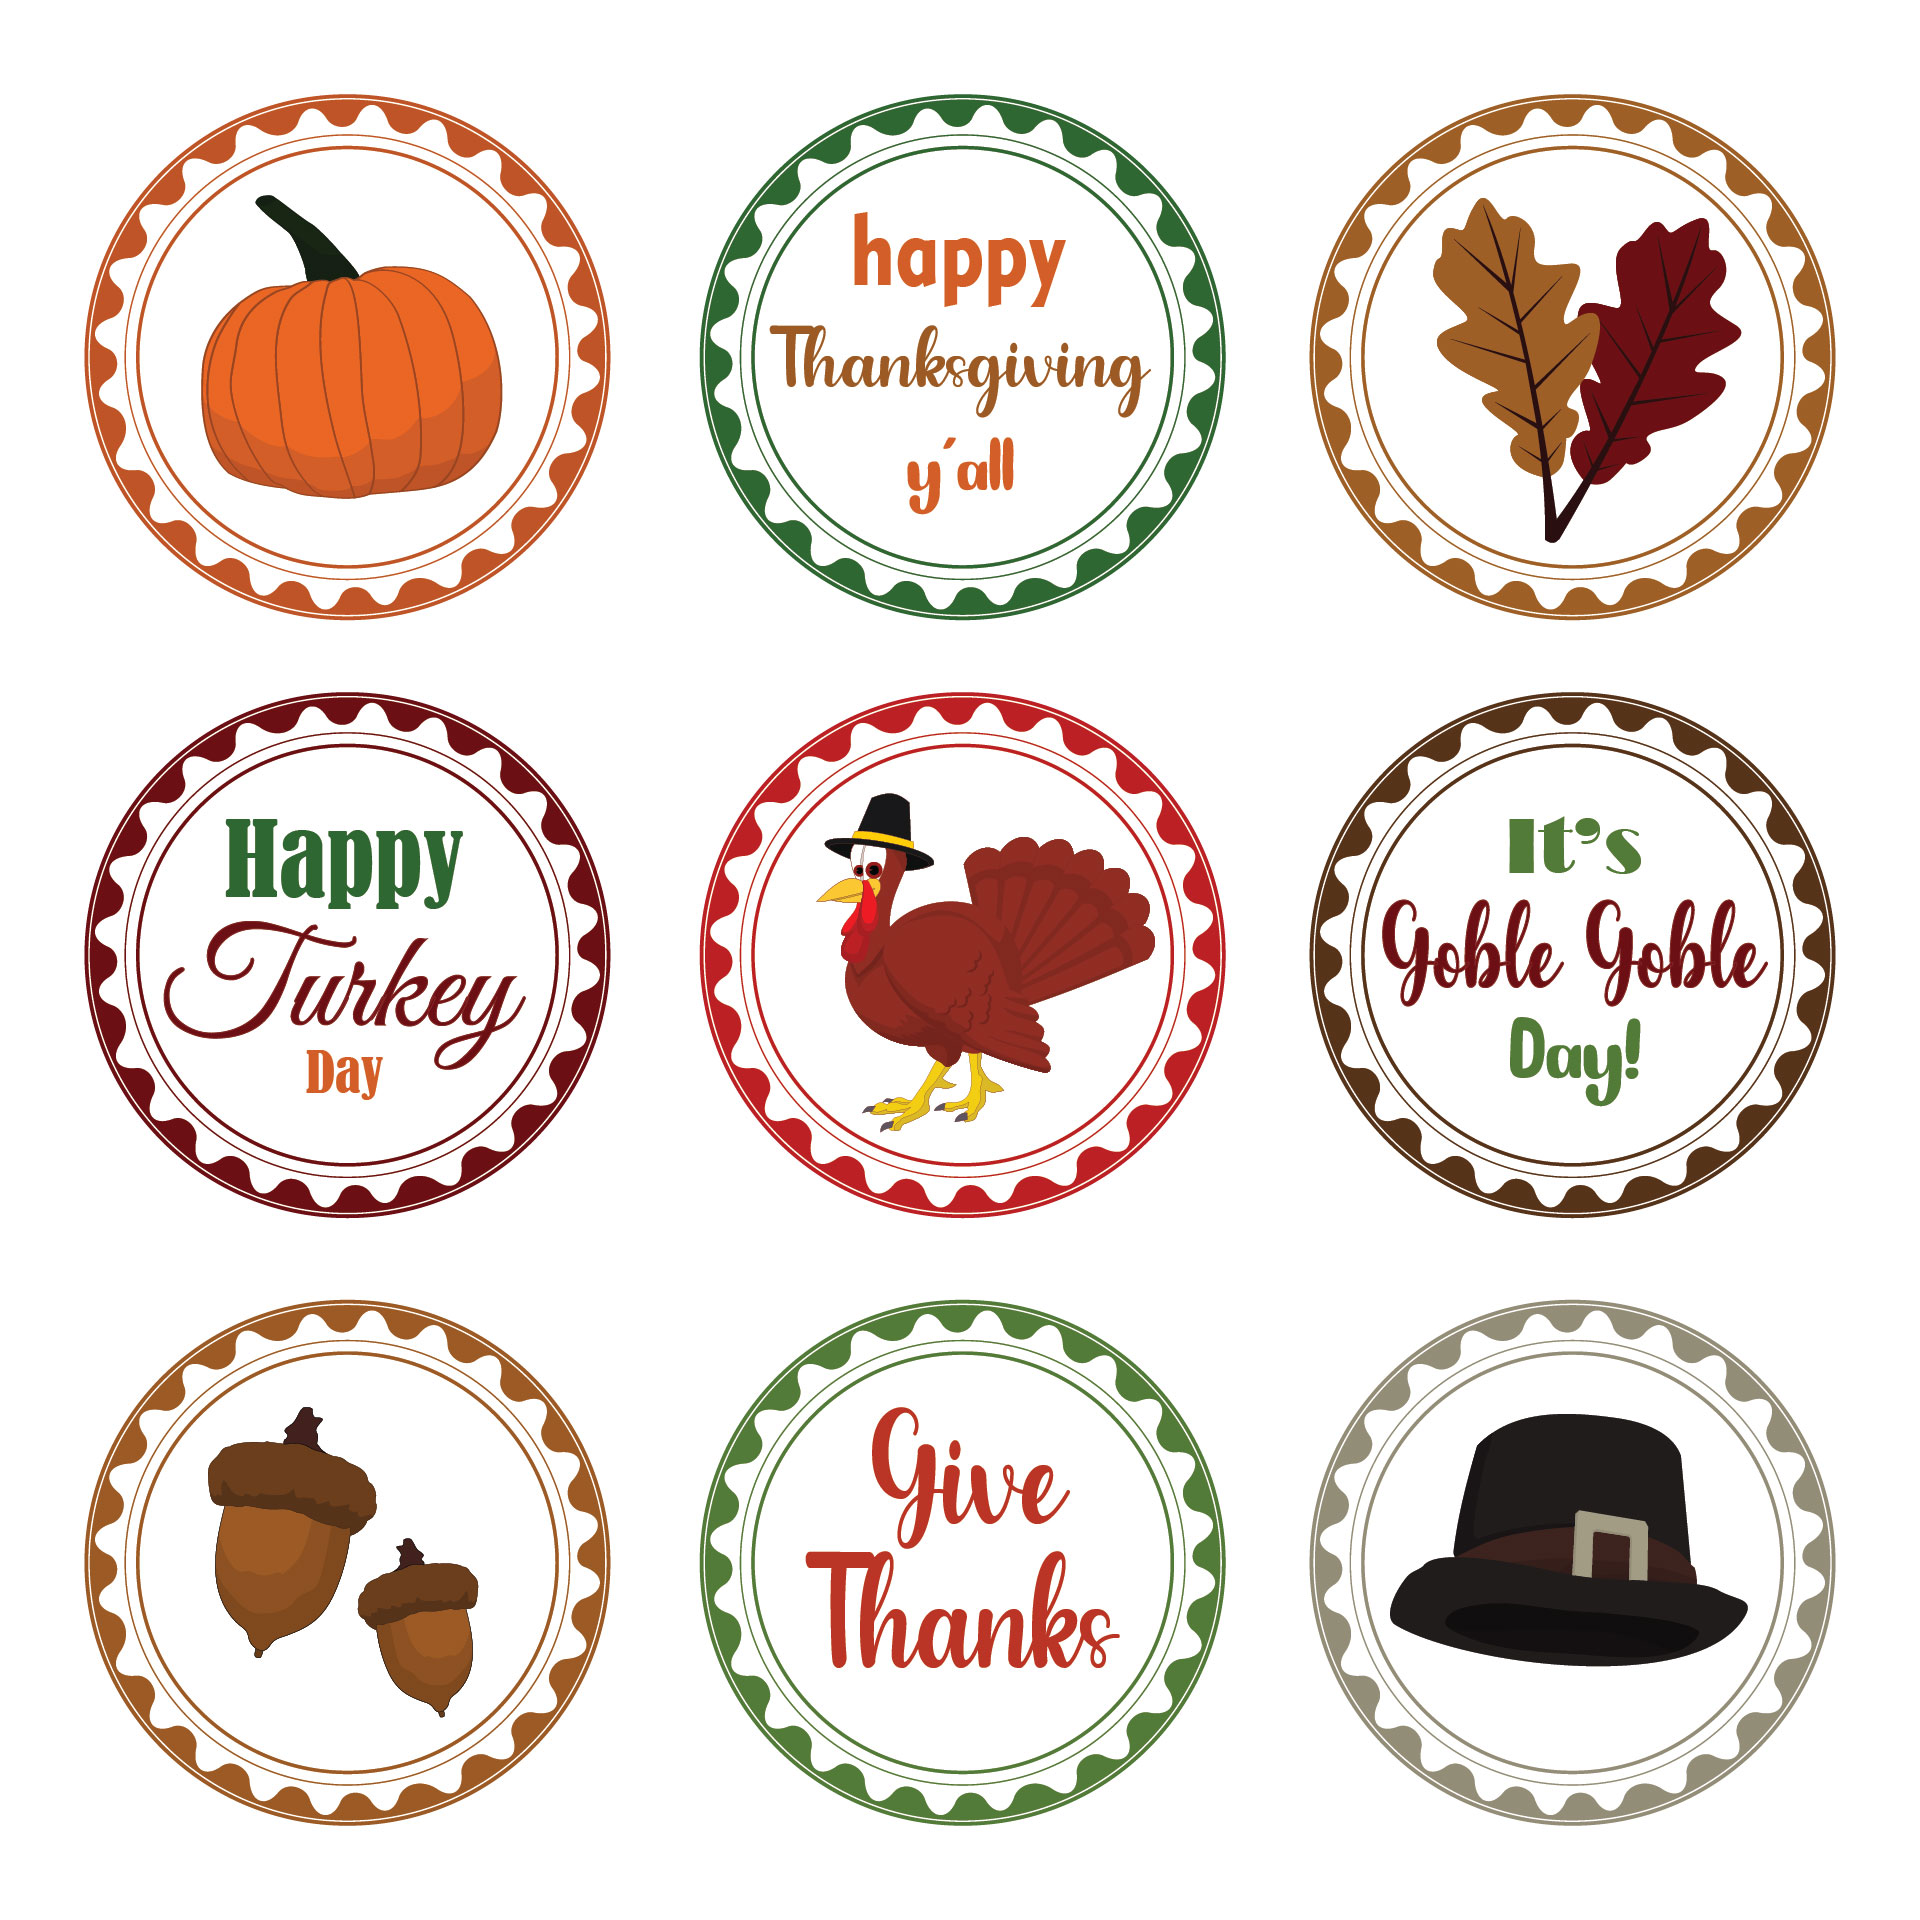 7 Best Images of Happy Thanksgiving Free Printable Tags - Happy ...